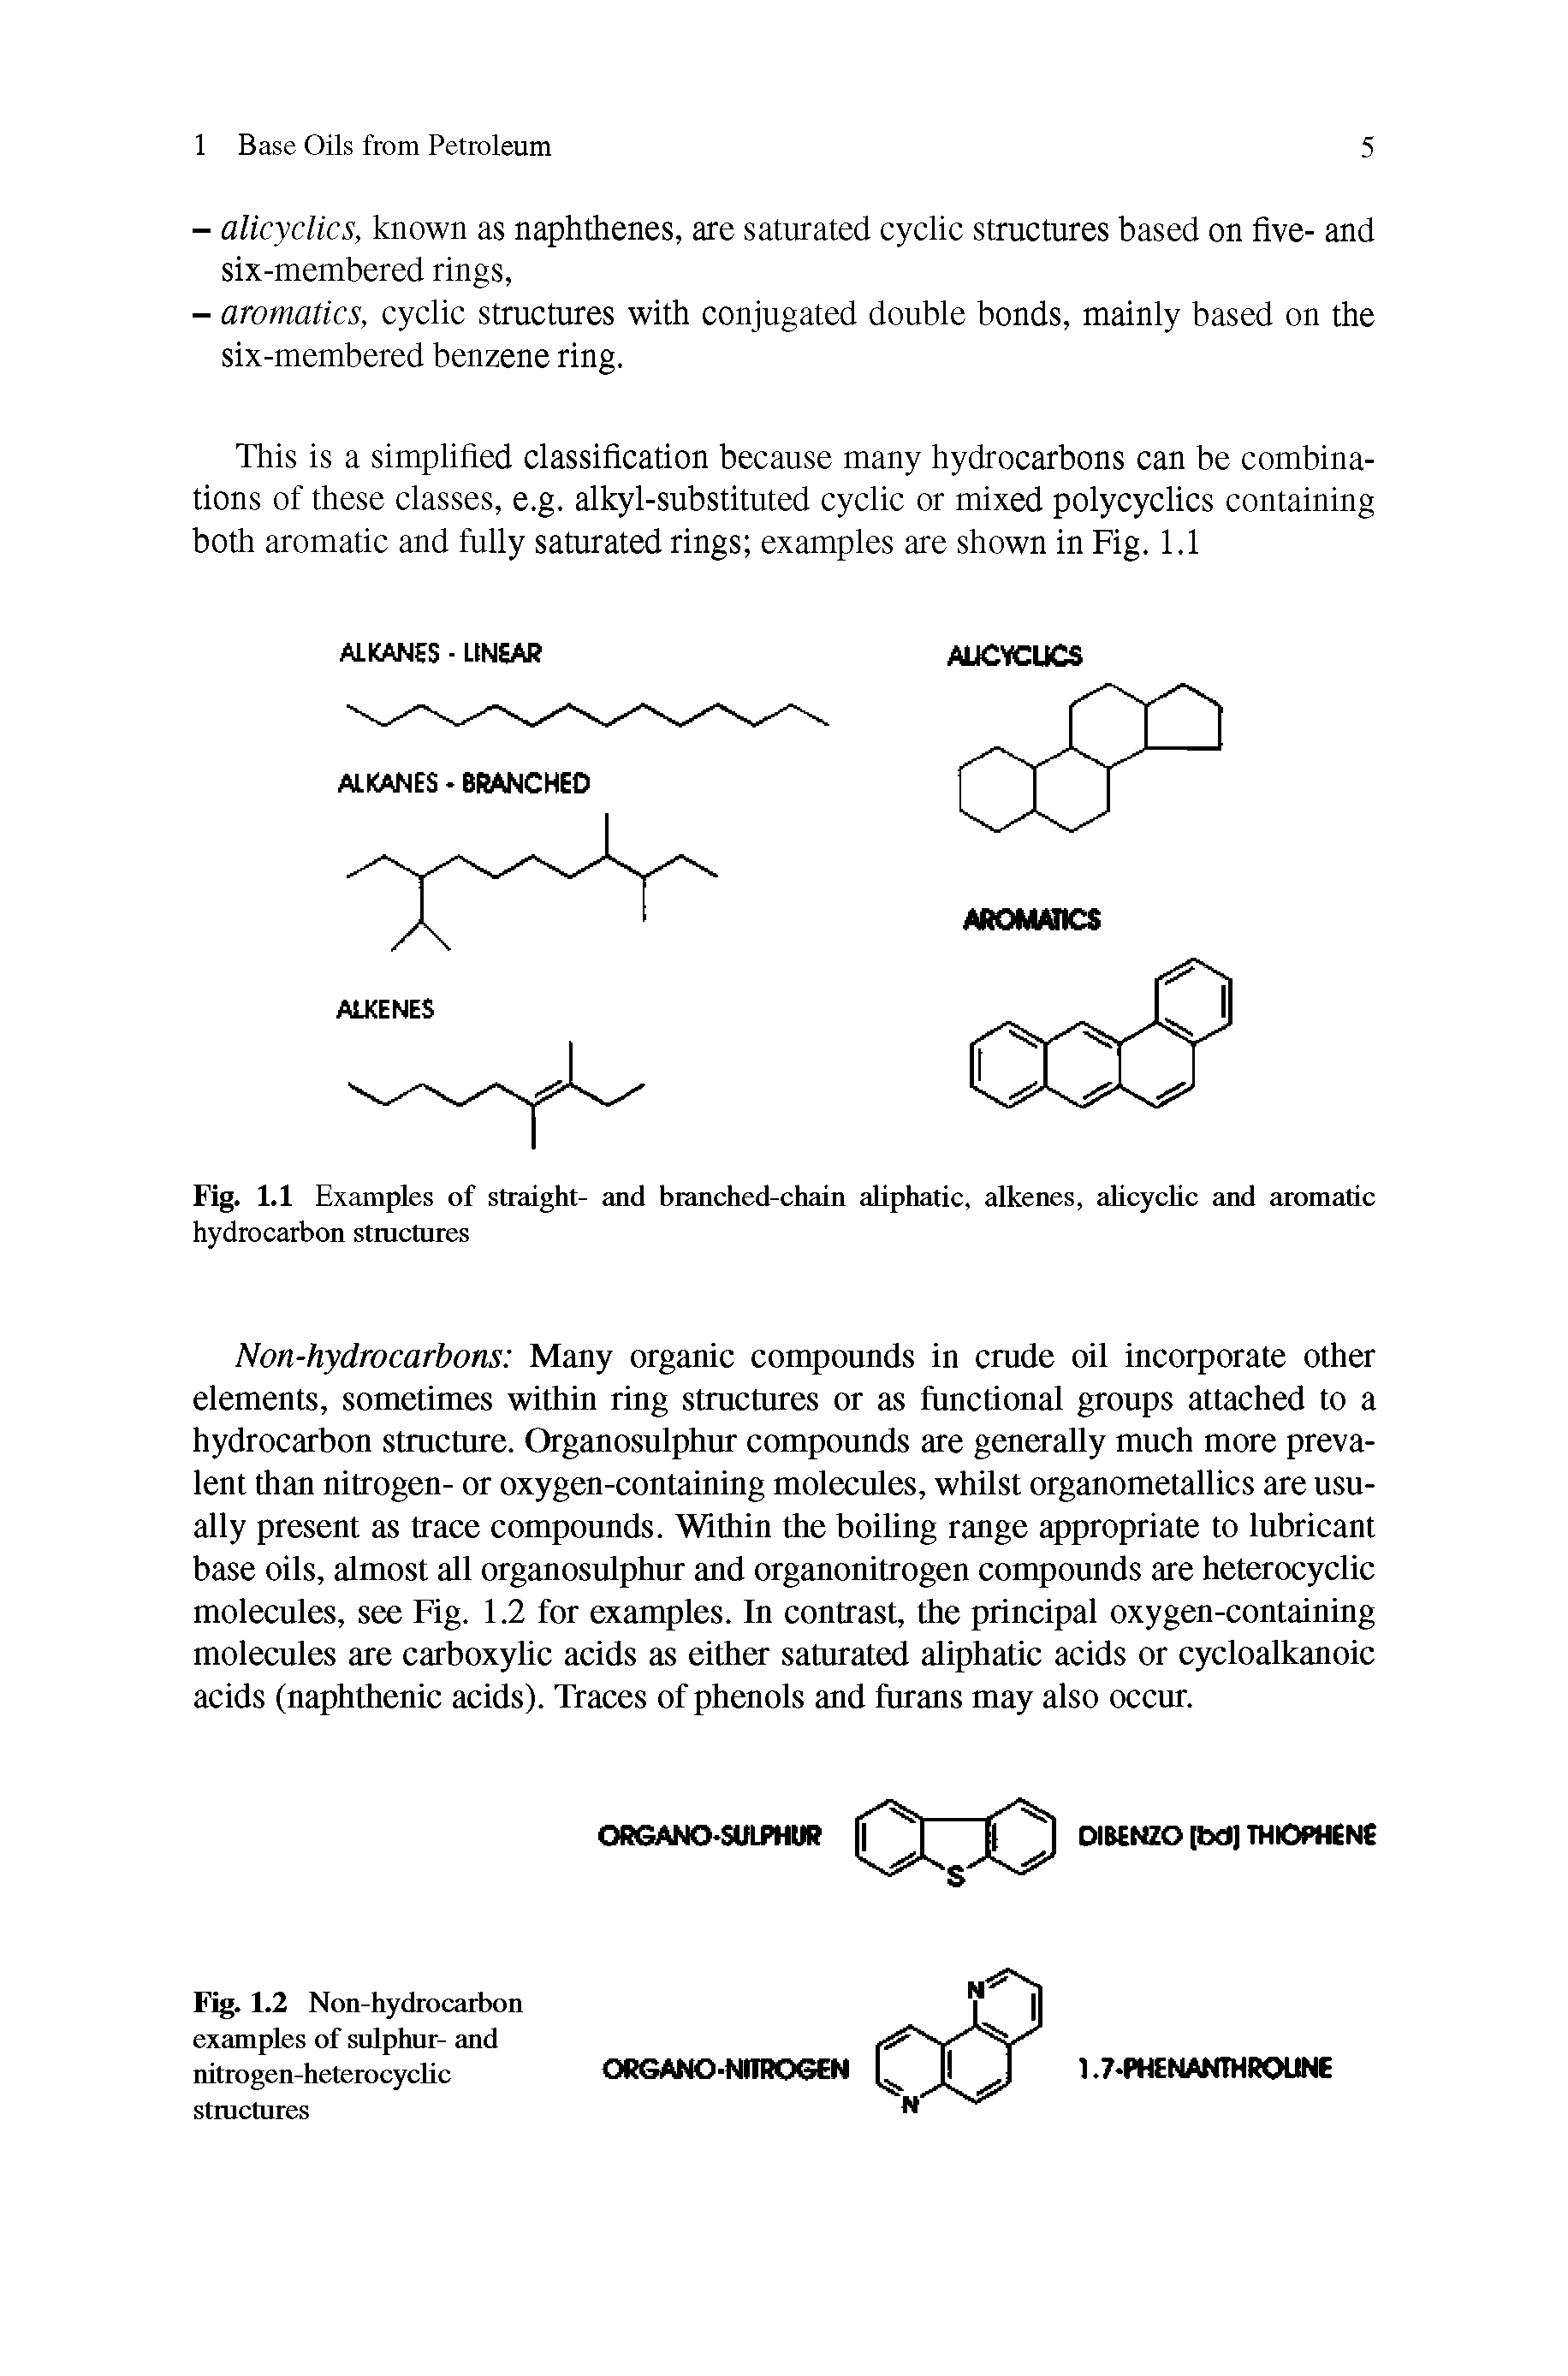 Fig. 1.1 Examples of straight- and branched-chain aliphatic, alkenes, ahcychc and aromatic hydrocarbon stmctures...